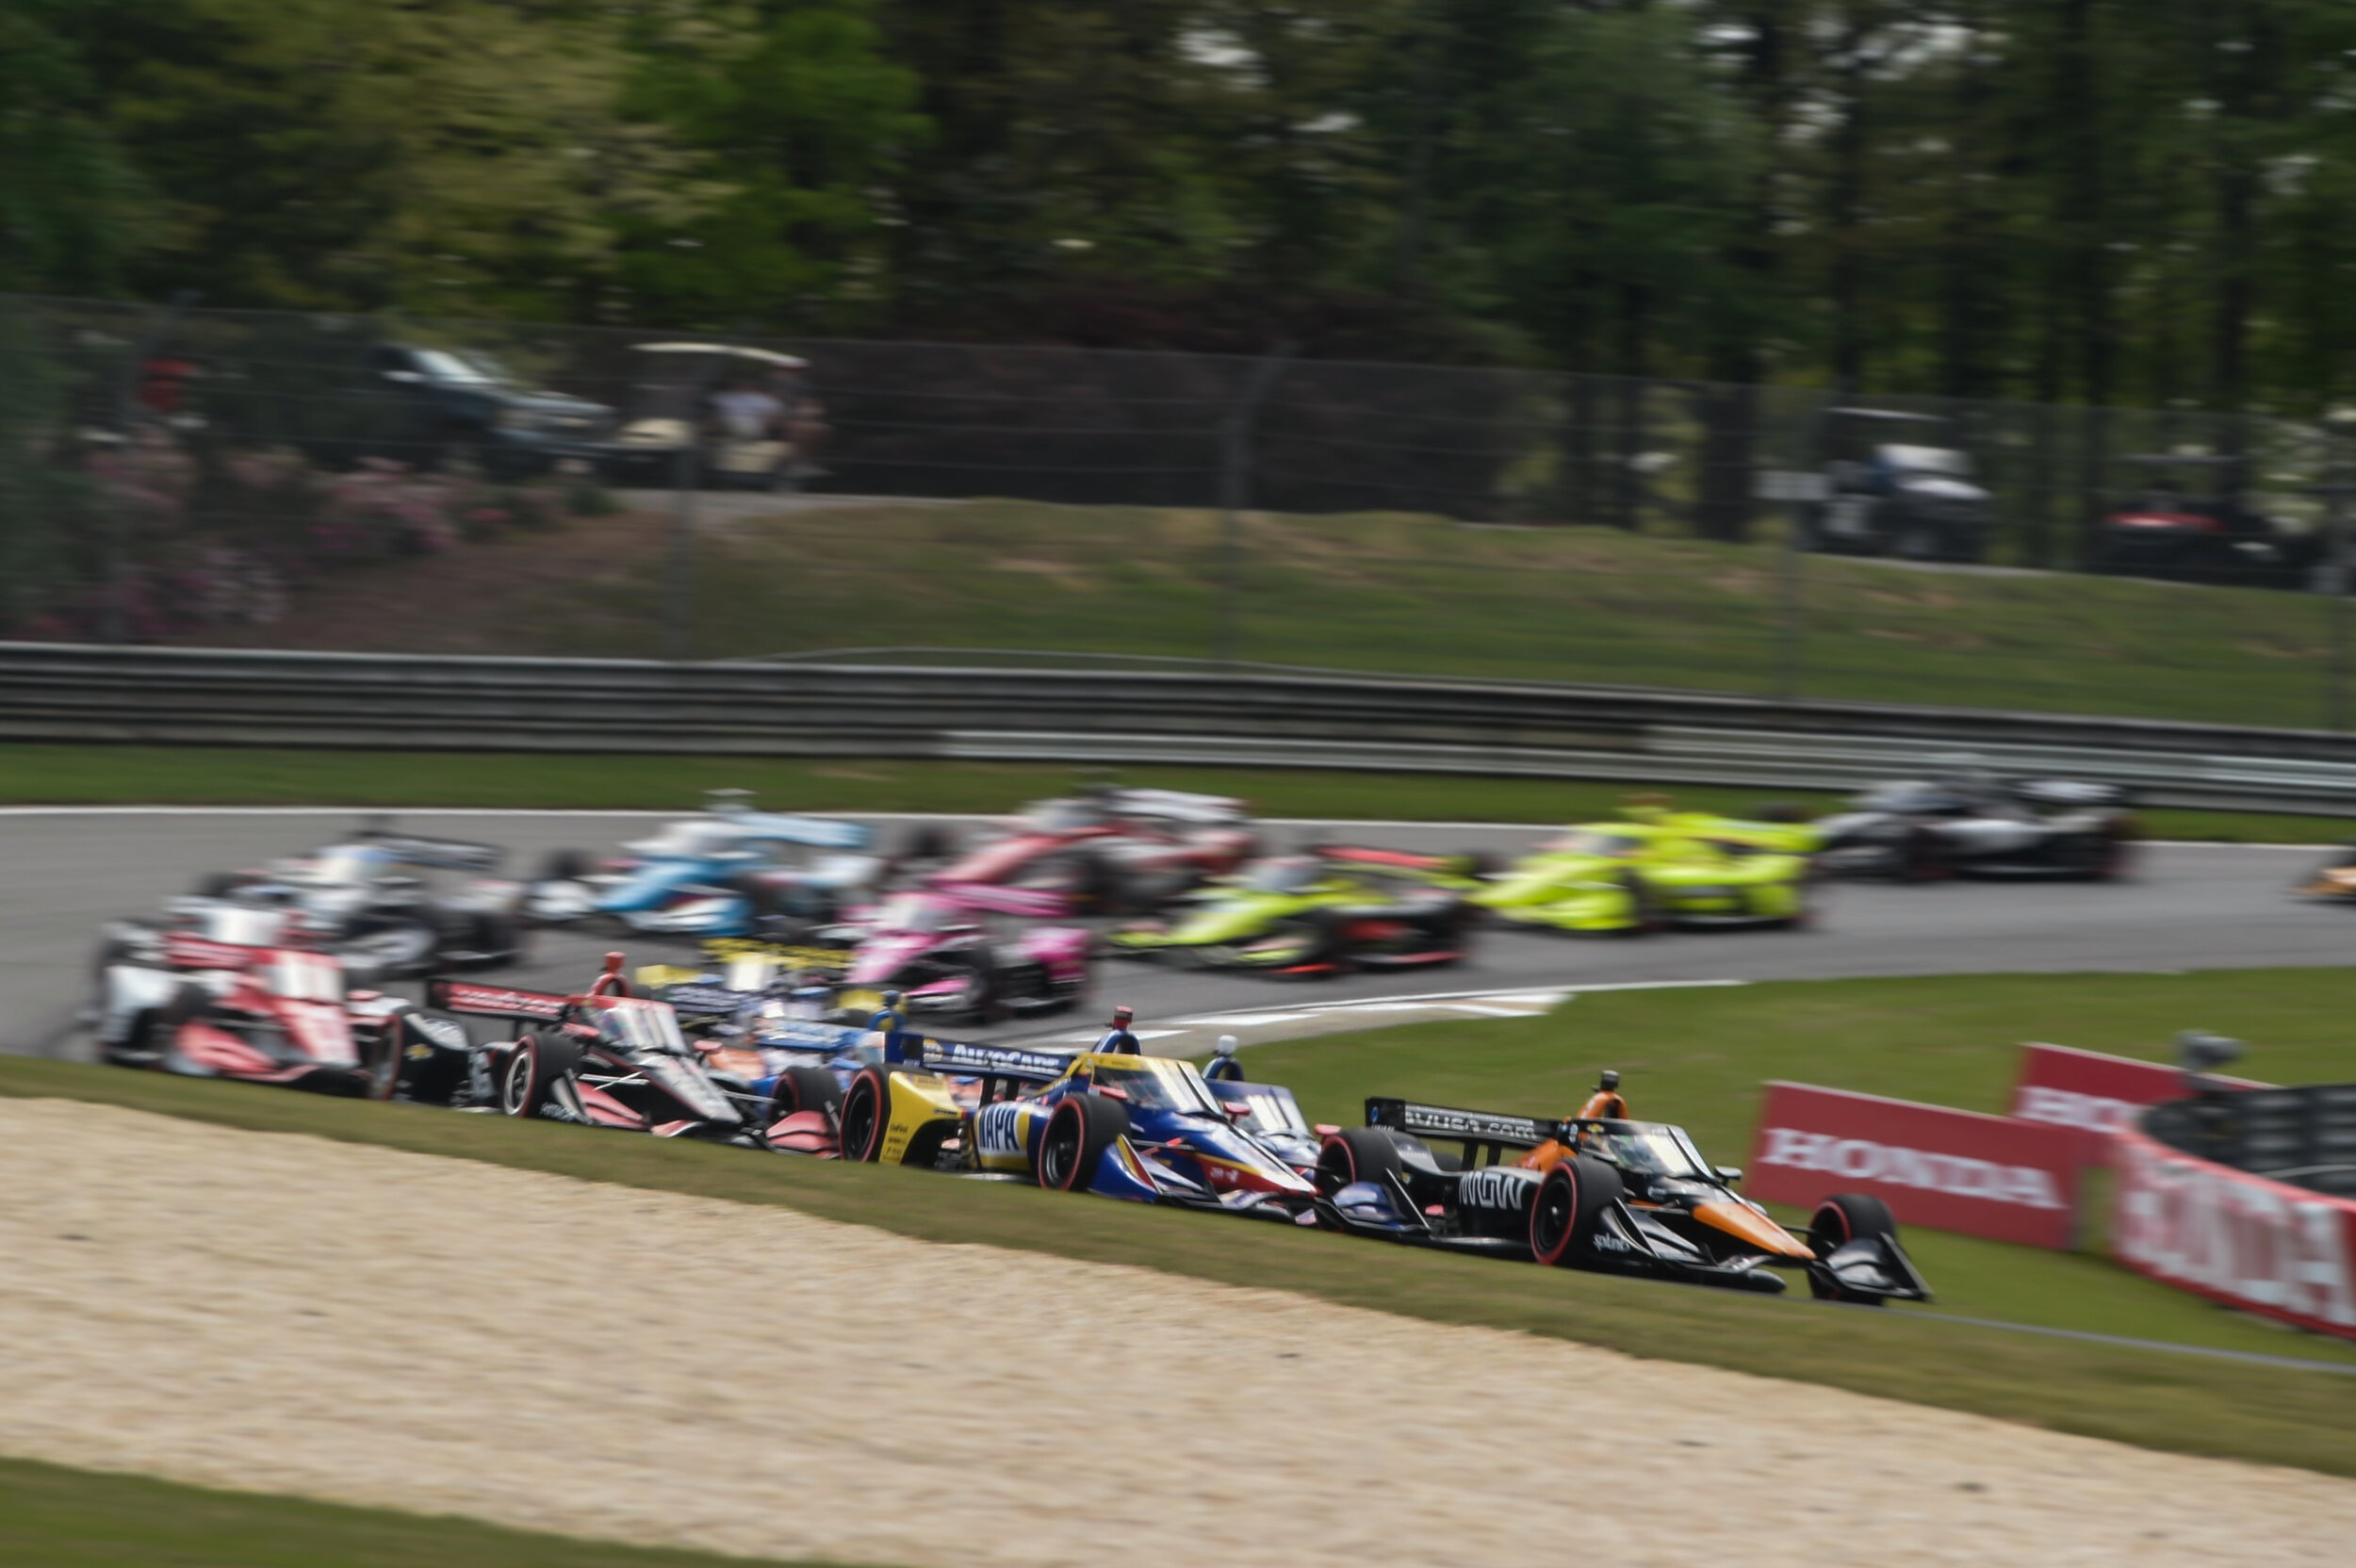  Pato O'Ward leads the field to green at Barber Motorsport Park during the Honda Grand Prix of Alabama. 